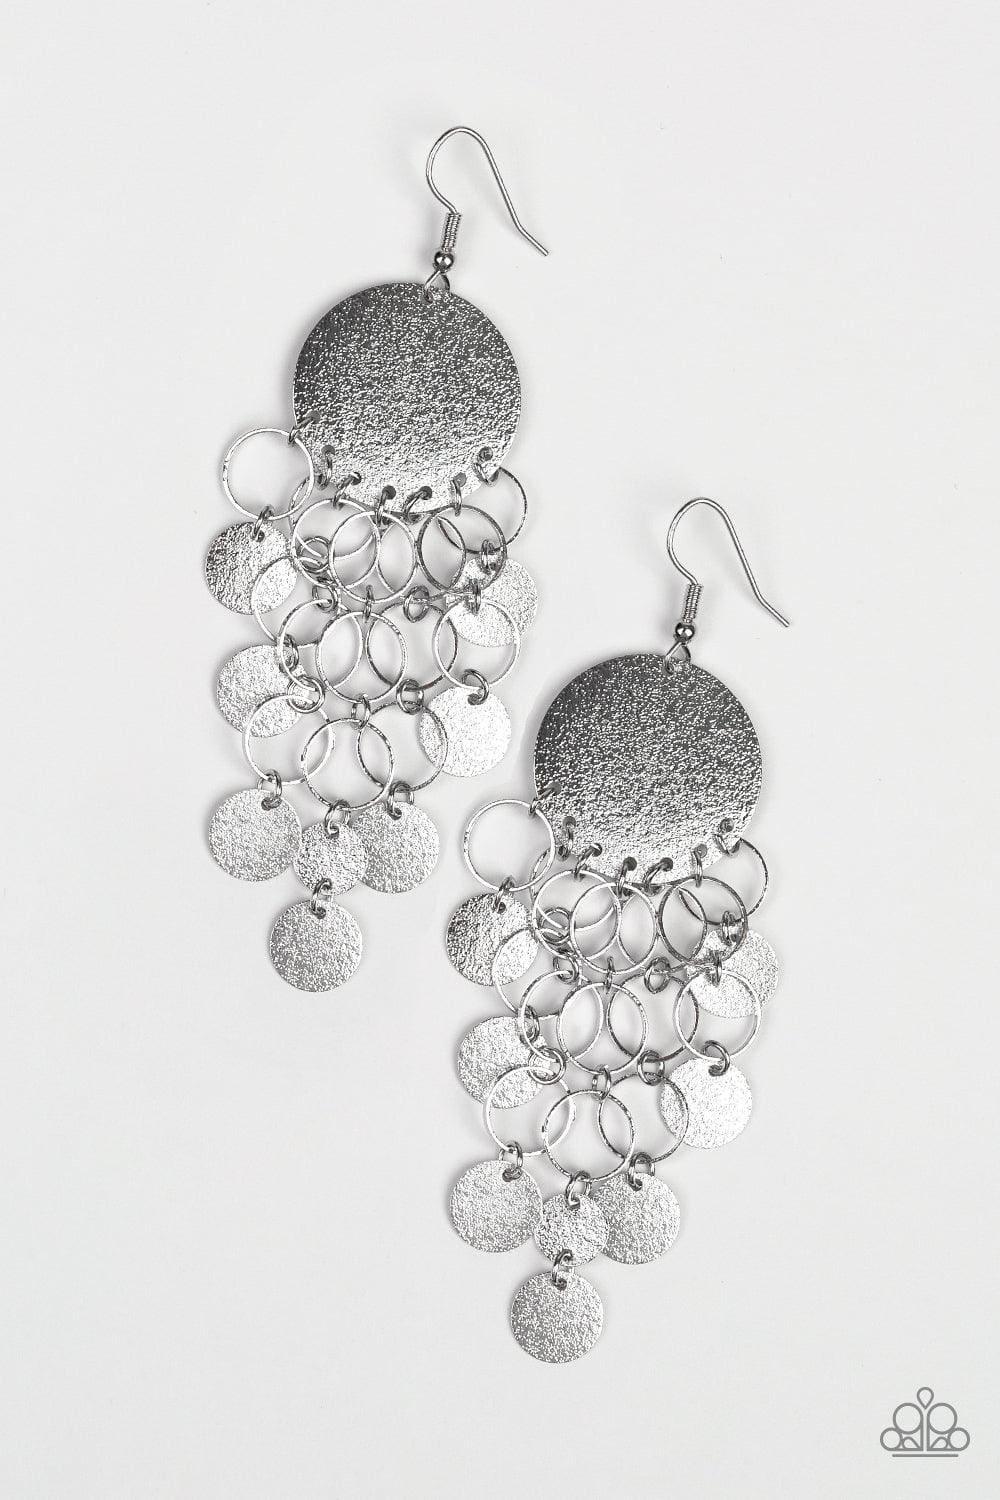 Paparazzi Accessories - Turn On The Brights - Silver Earrings - Bling by JessieK